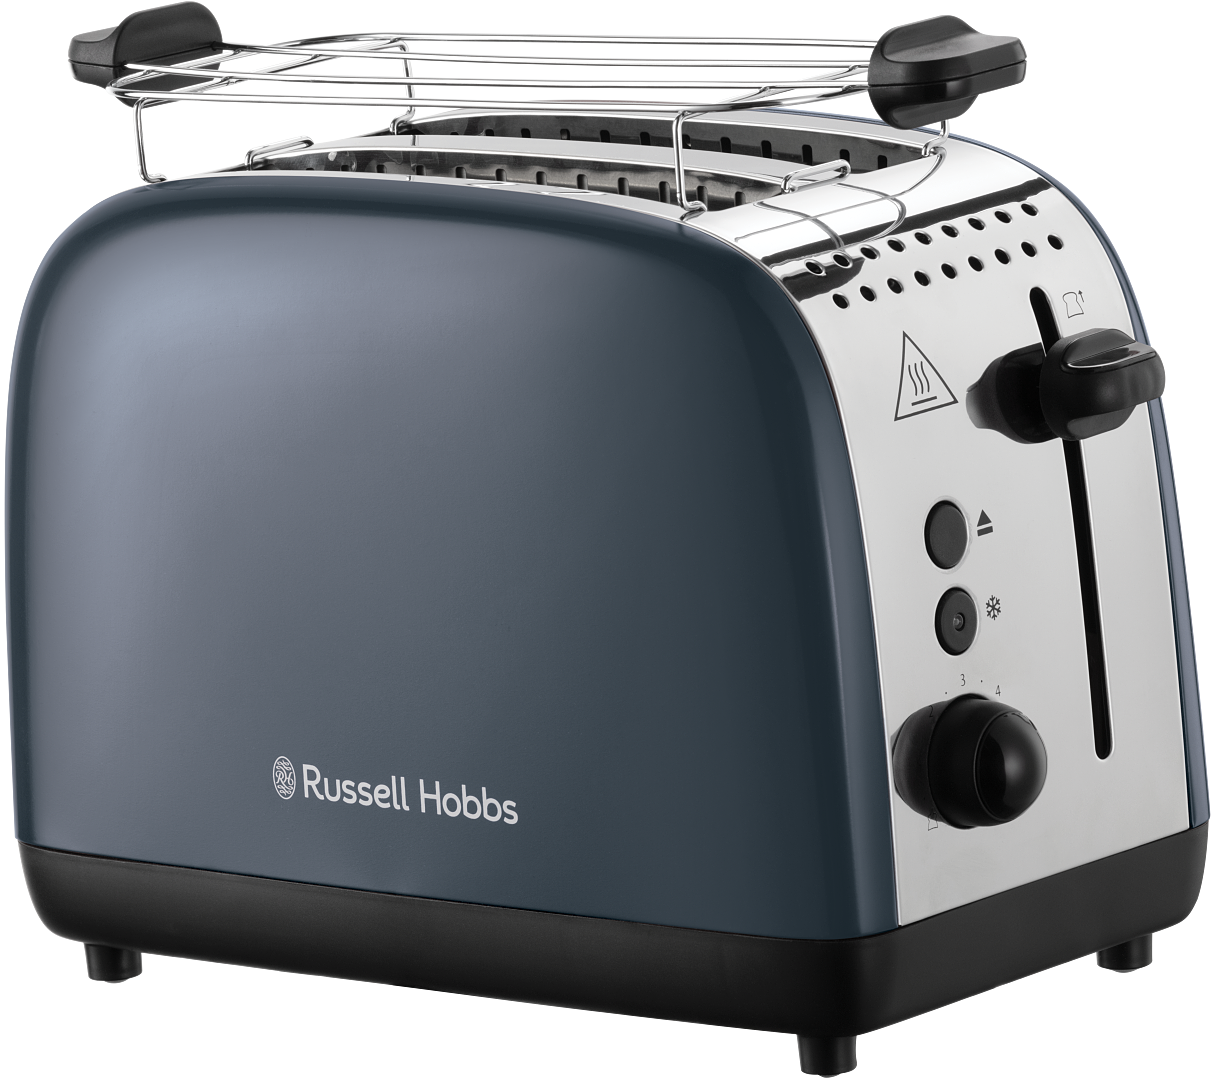 Russell Hobbs_Colours Plus Toaster_Storm Grey_59,99 Euro (2)